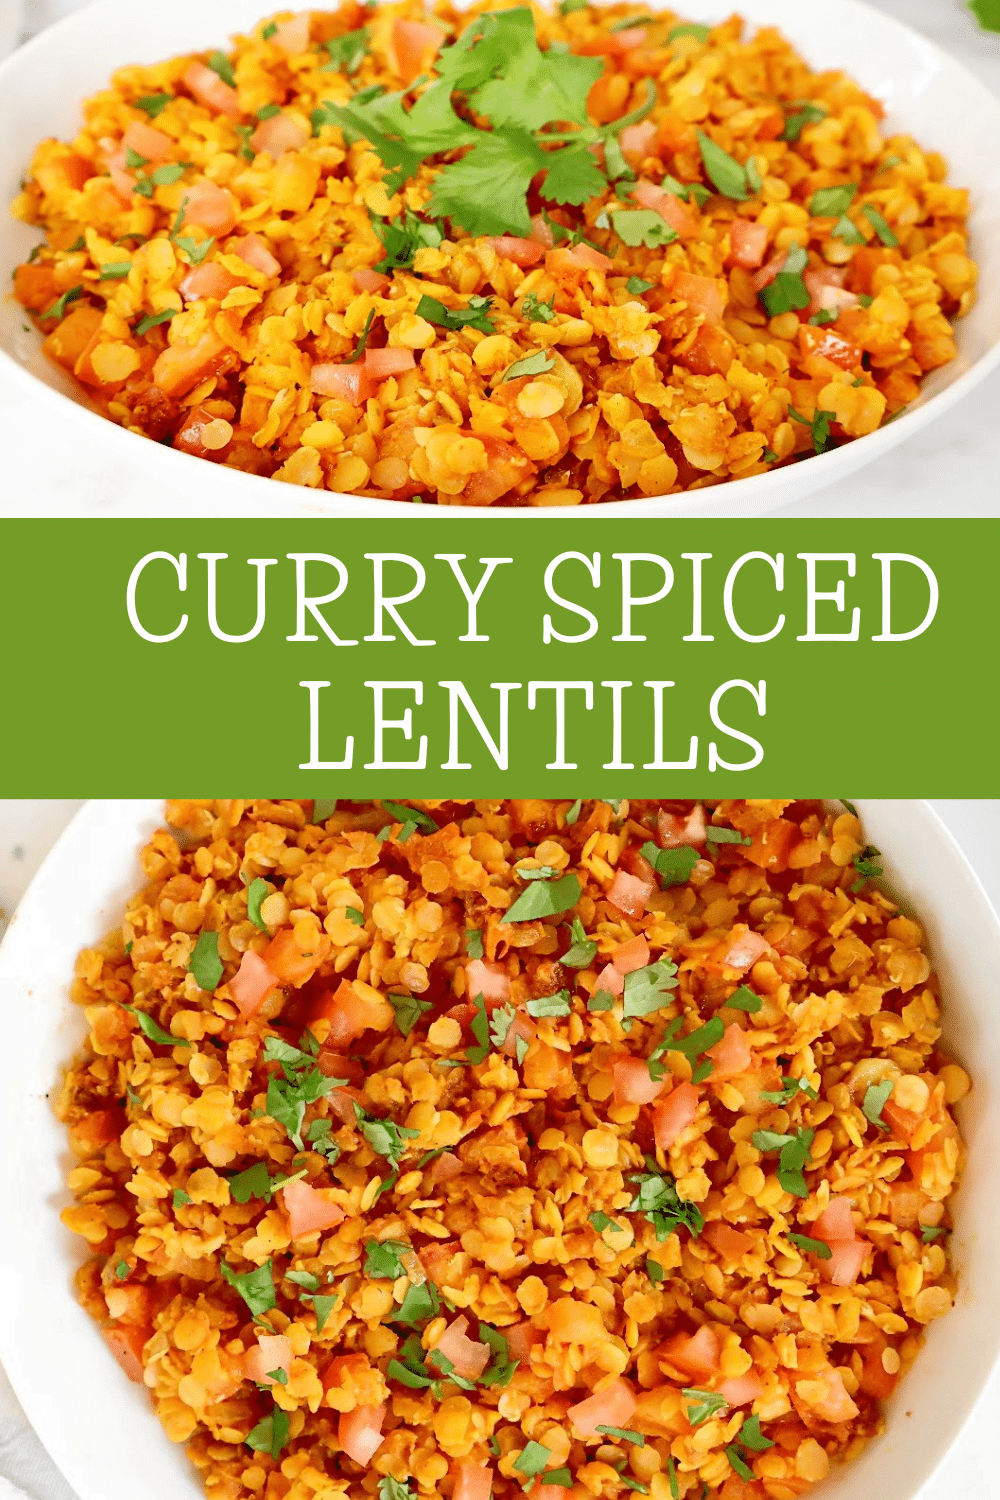 Curry Spiced Lentils ~ Savory and aromatic curry-spiced lentils are rich with Indian flavors and ready in under 30 minutes! via @thiswifecooks